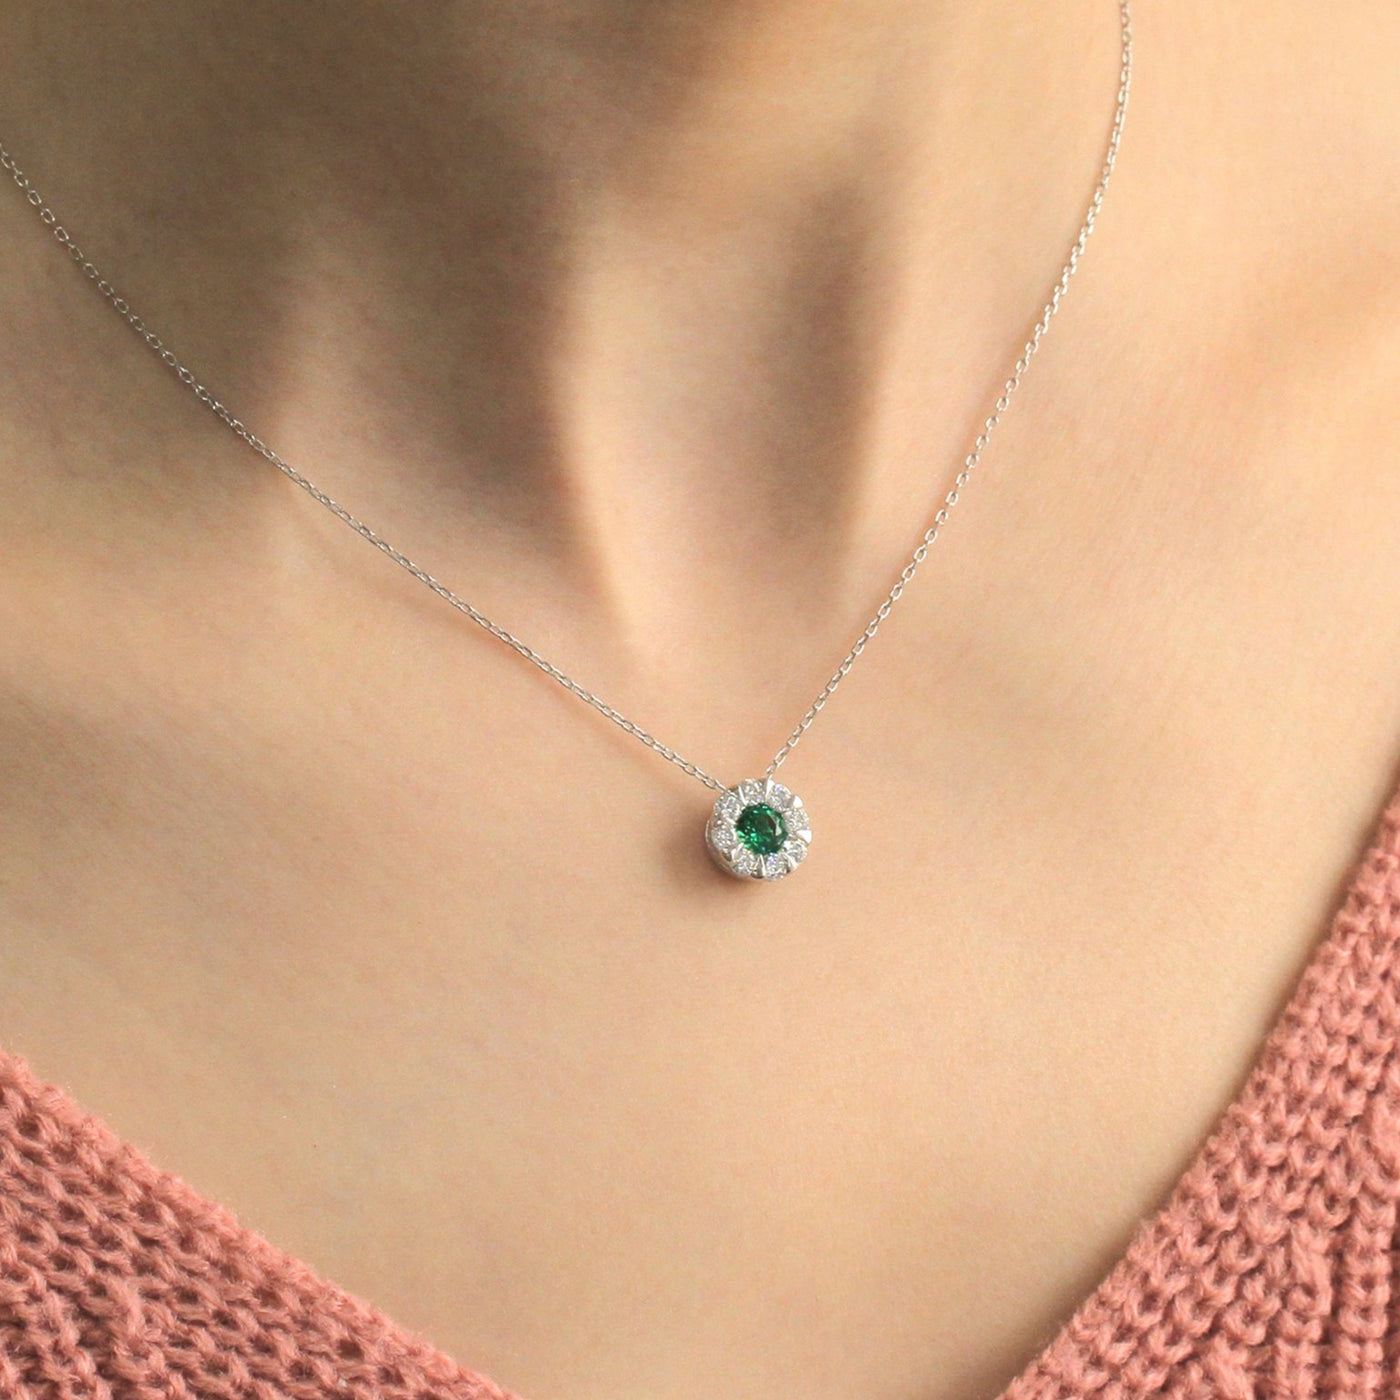 Illusion Invisible Setting Emerald Jewelry Set: Ring, Necklace, Earrings